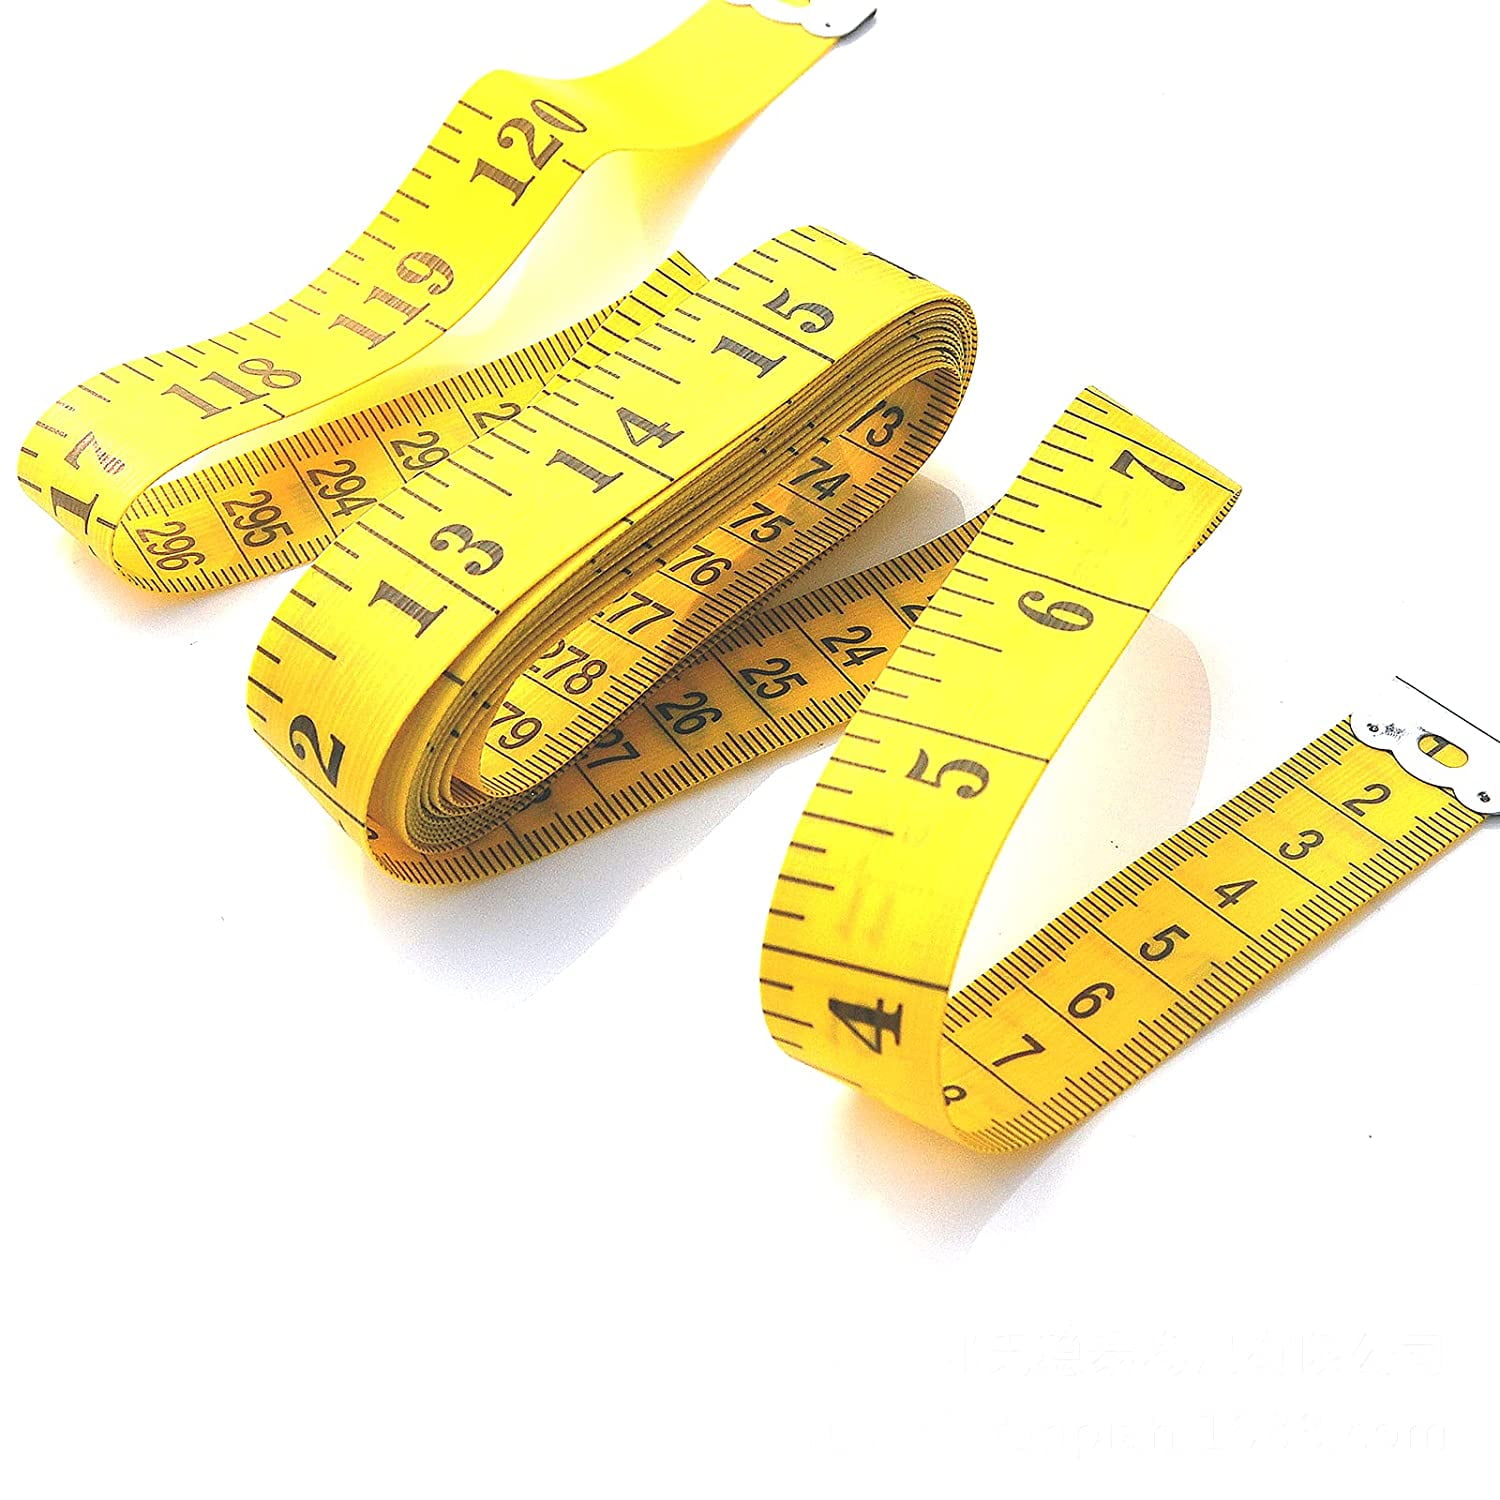 2 Pack Thicken Cloth Ruler Tape Measure, 300 cm/120 Inch Soft Pocket  Measuring Tape for Body Fabric Sewing Tailor, Weight Loss, Craft Knitting,  Double